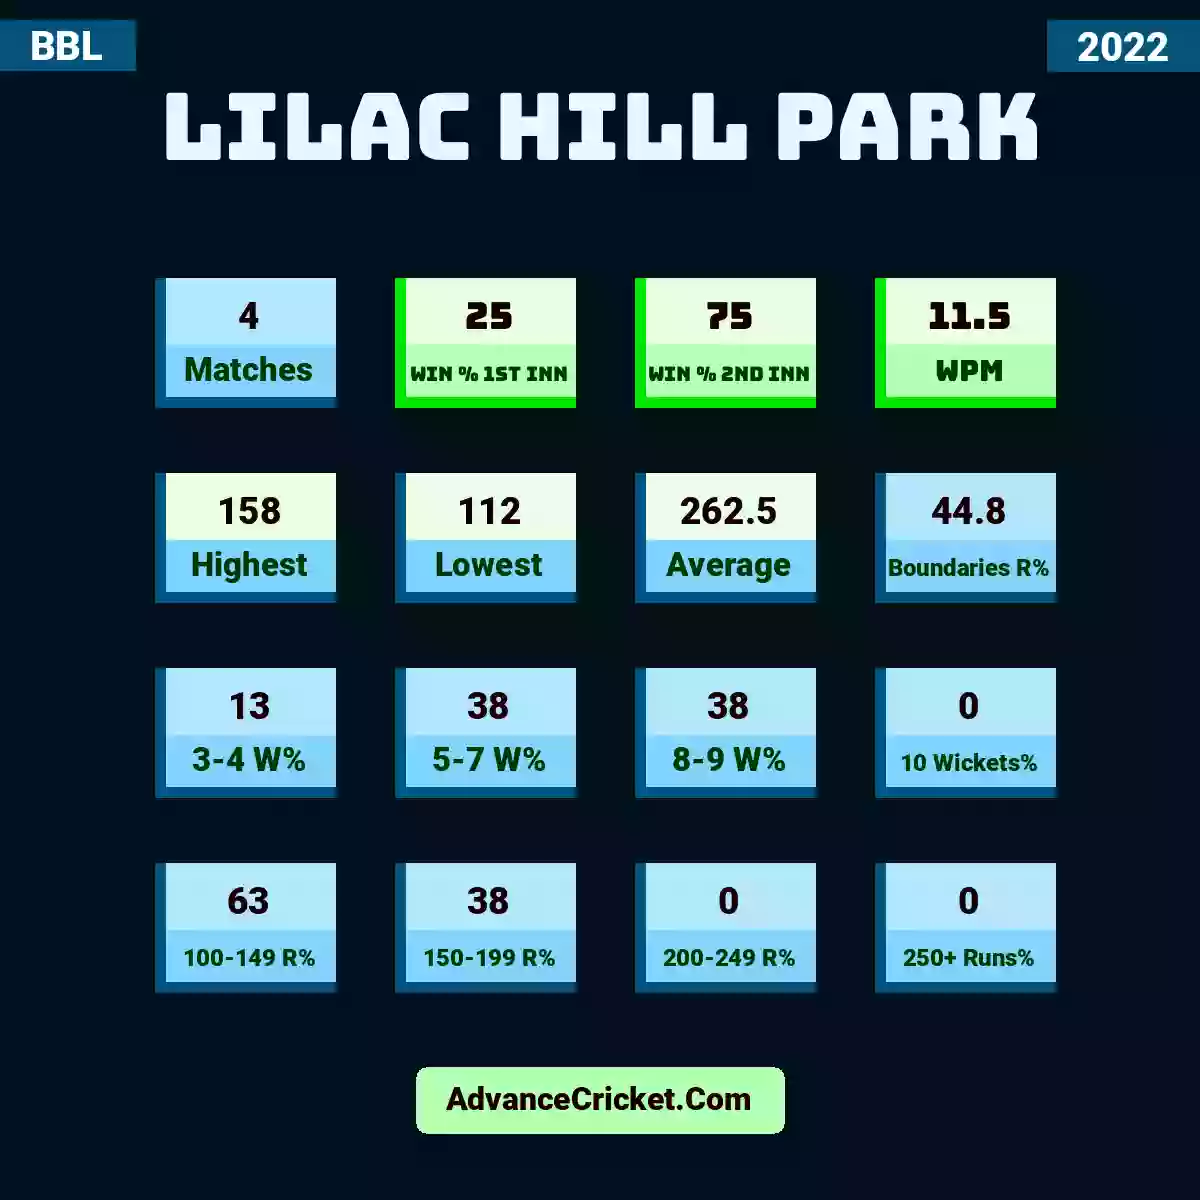 Image showing Lilac Hill Park with Matches: 4, Win % 1st Inn: 25, Win % 2nd Inn: 75, WPM: 11.5, Highest: 158, Lowest: 112, Average: 262.5, Boundaries R%: 44.8, 3-4 W%: 13, 5-7 W%: 38, 8-9 W%: 38, 10 Wickets%: 0, 100-149 R%: 63, 150-199 R%: 38, 200-249 R%: 0, 250+ Runs%: 0.